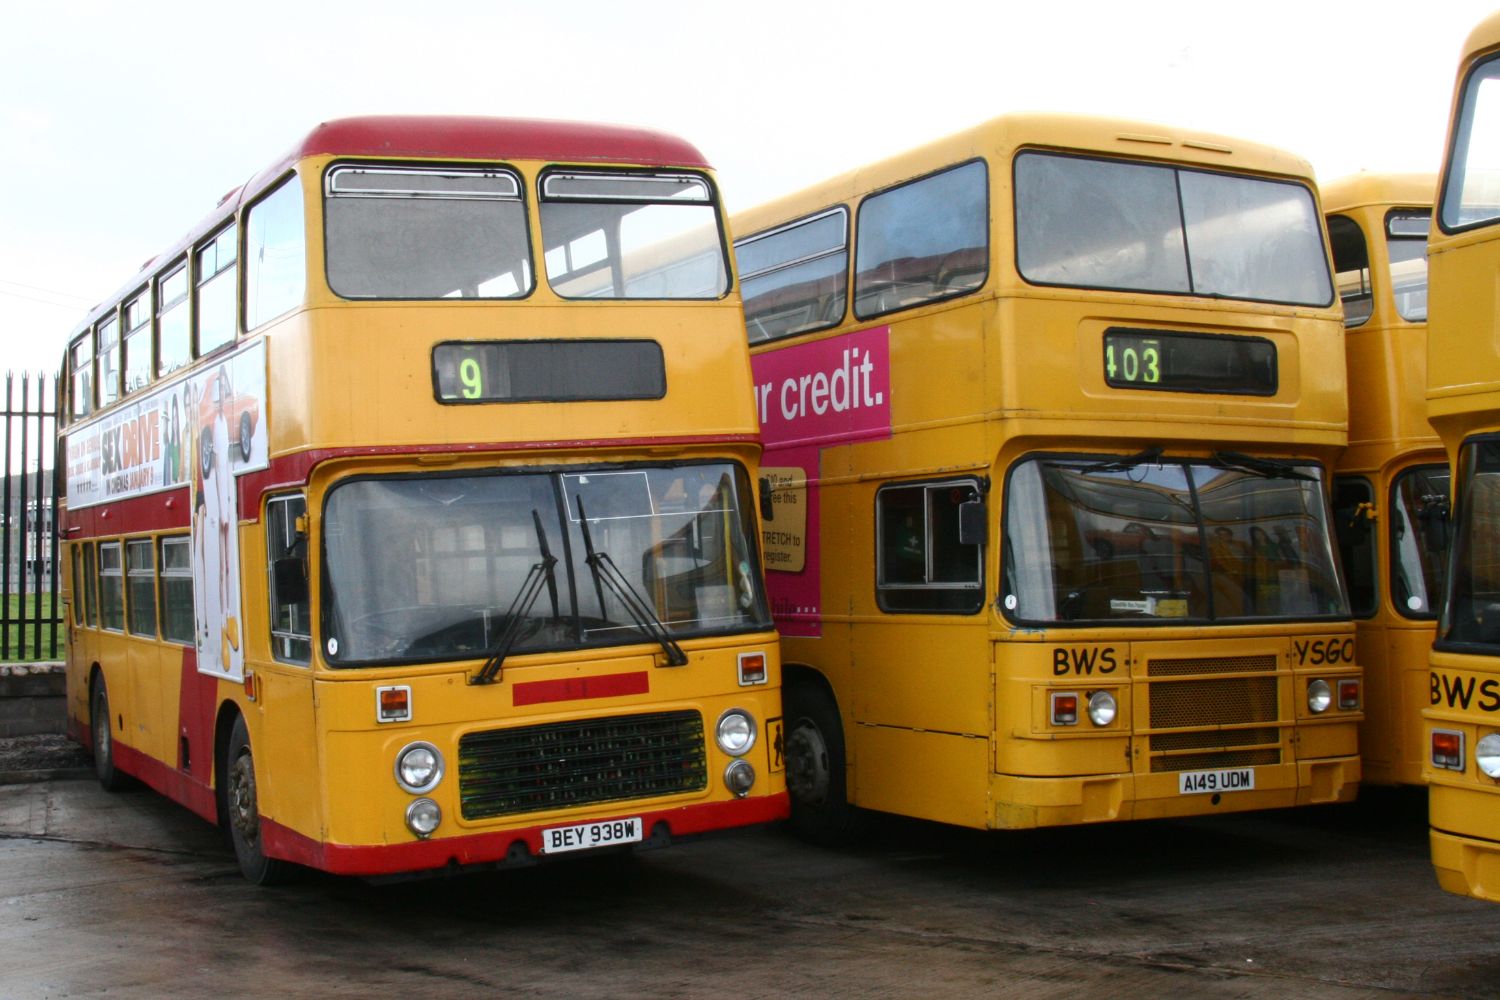 In the late 2000s, a large fleet of Bristol VRT and Leyland Olympian school buses were operated